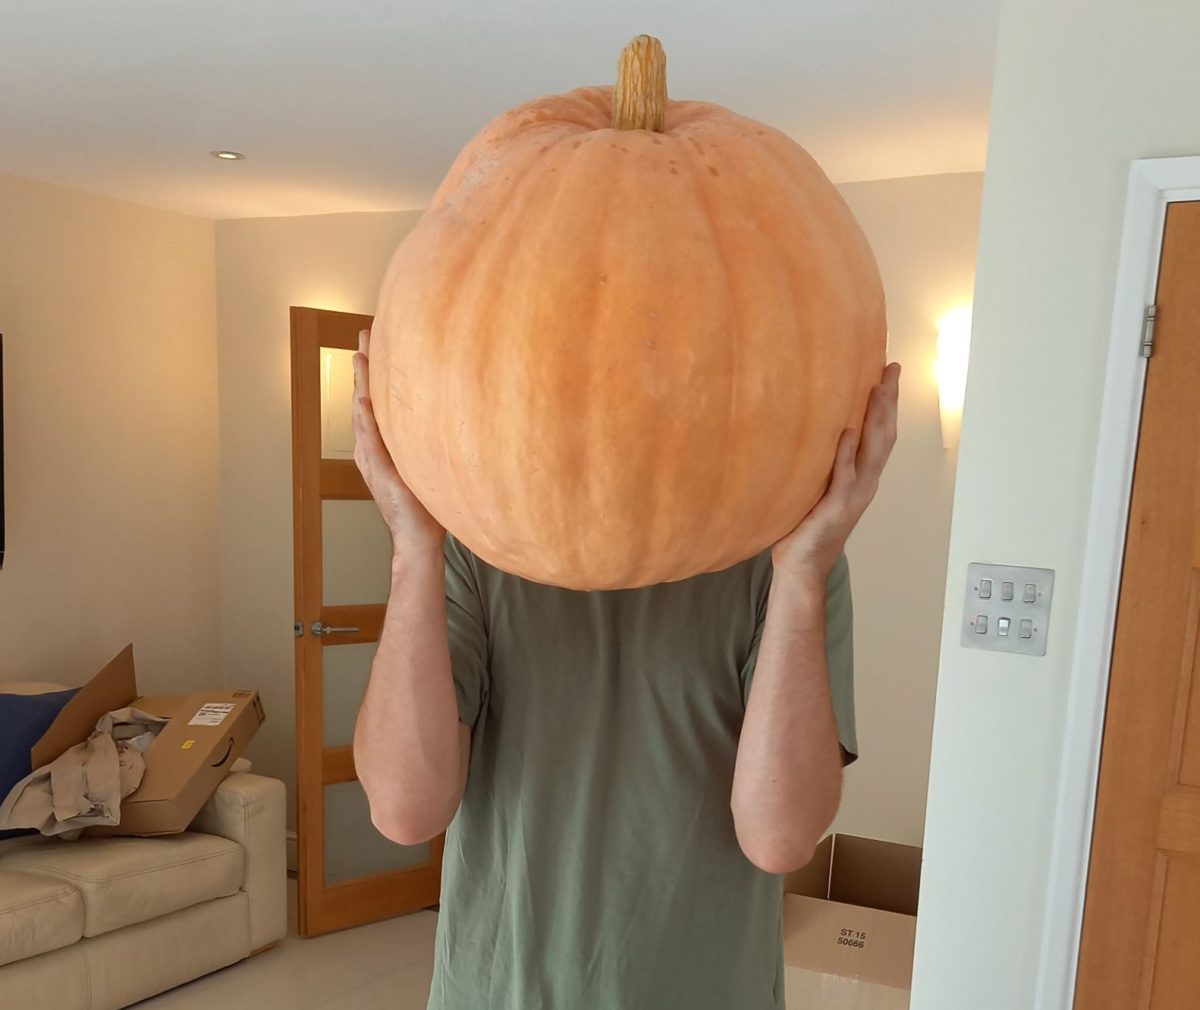 Man holding a giant pumpkin covering his face.